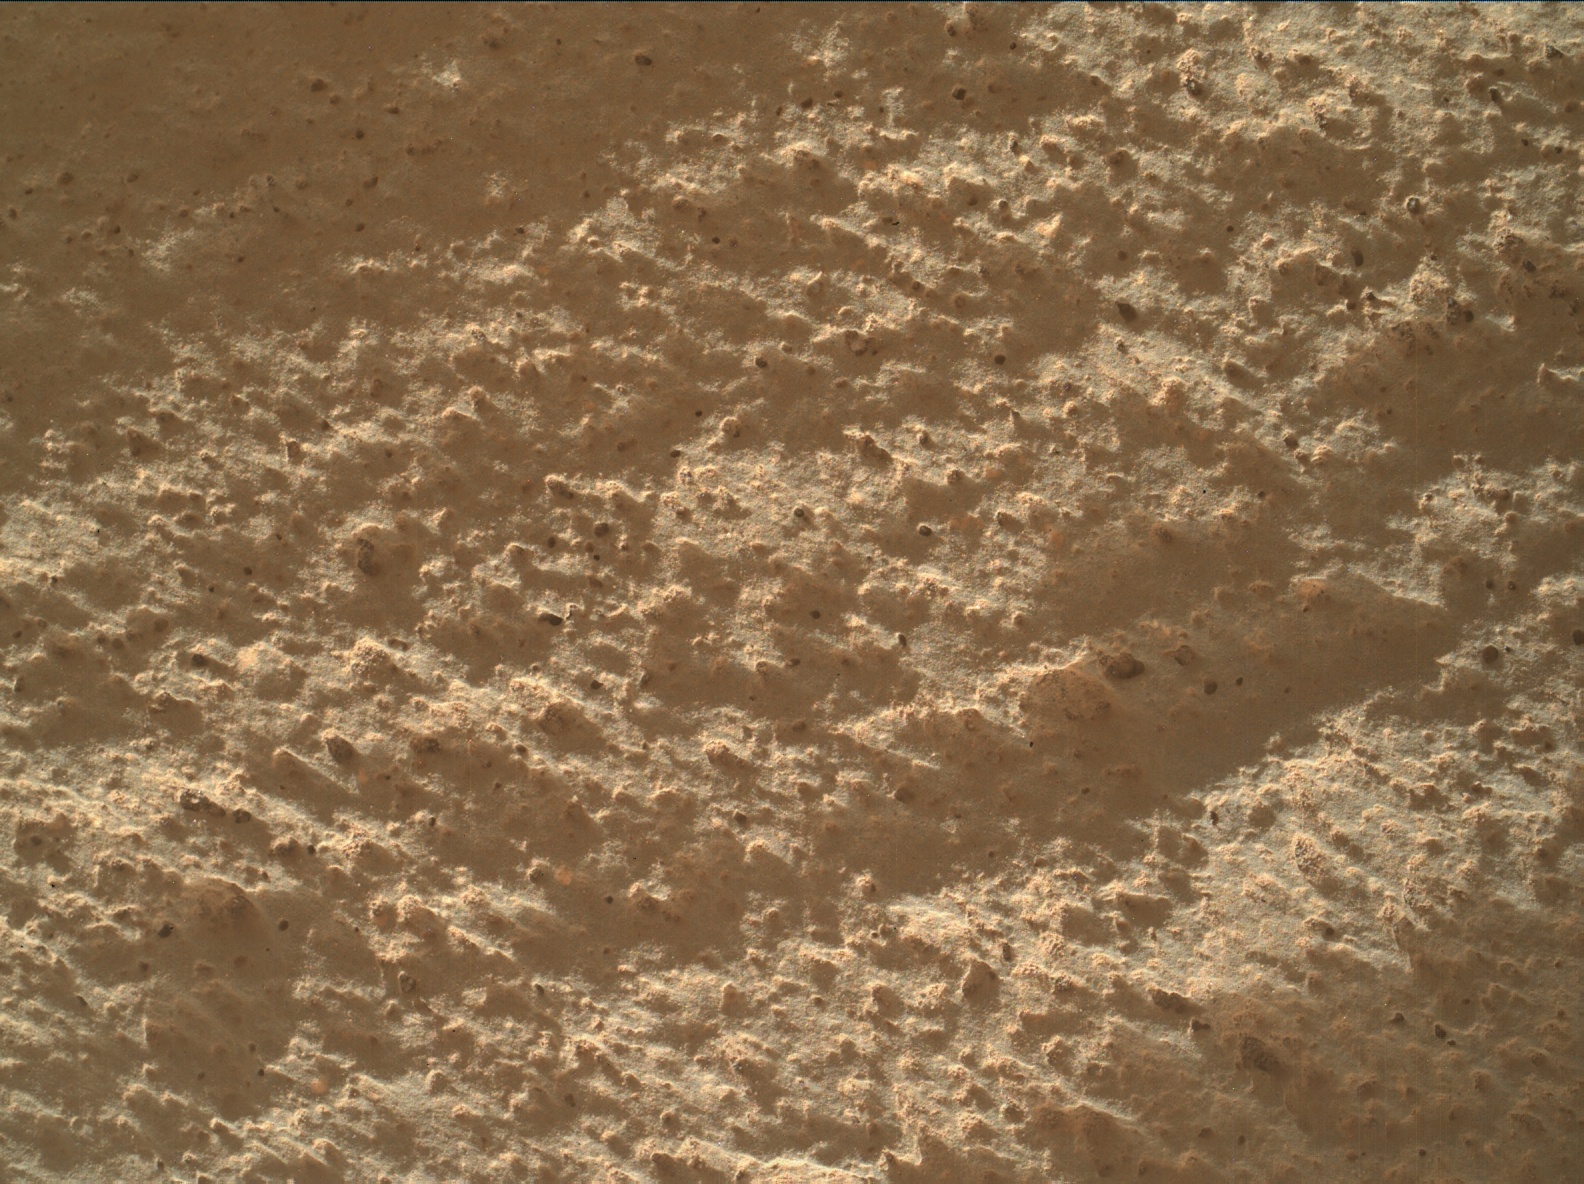 Nasa's Mars rover Curiosity acquired this image using its Mars Hand Lens Imager (MAHLI) on Sol 3428